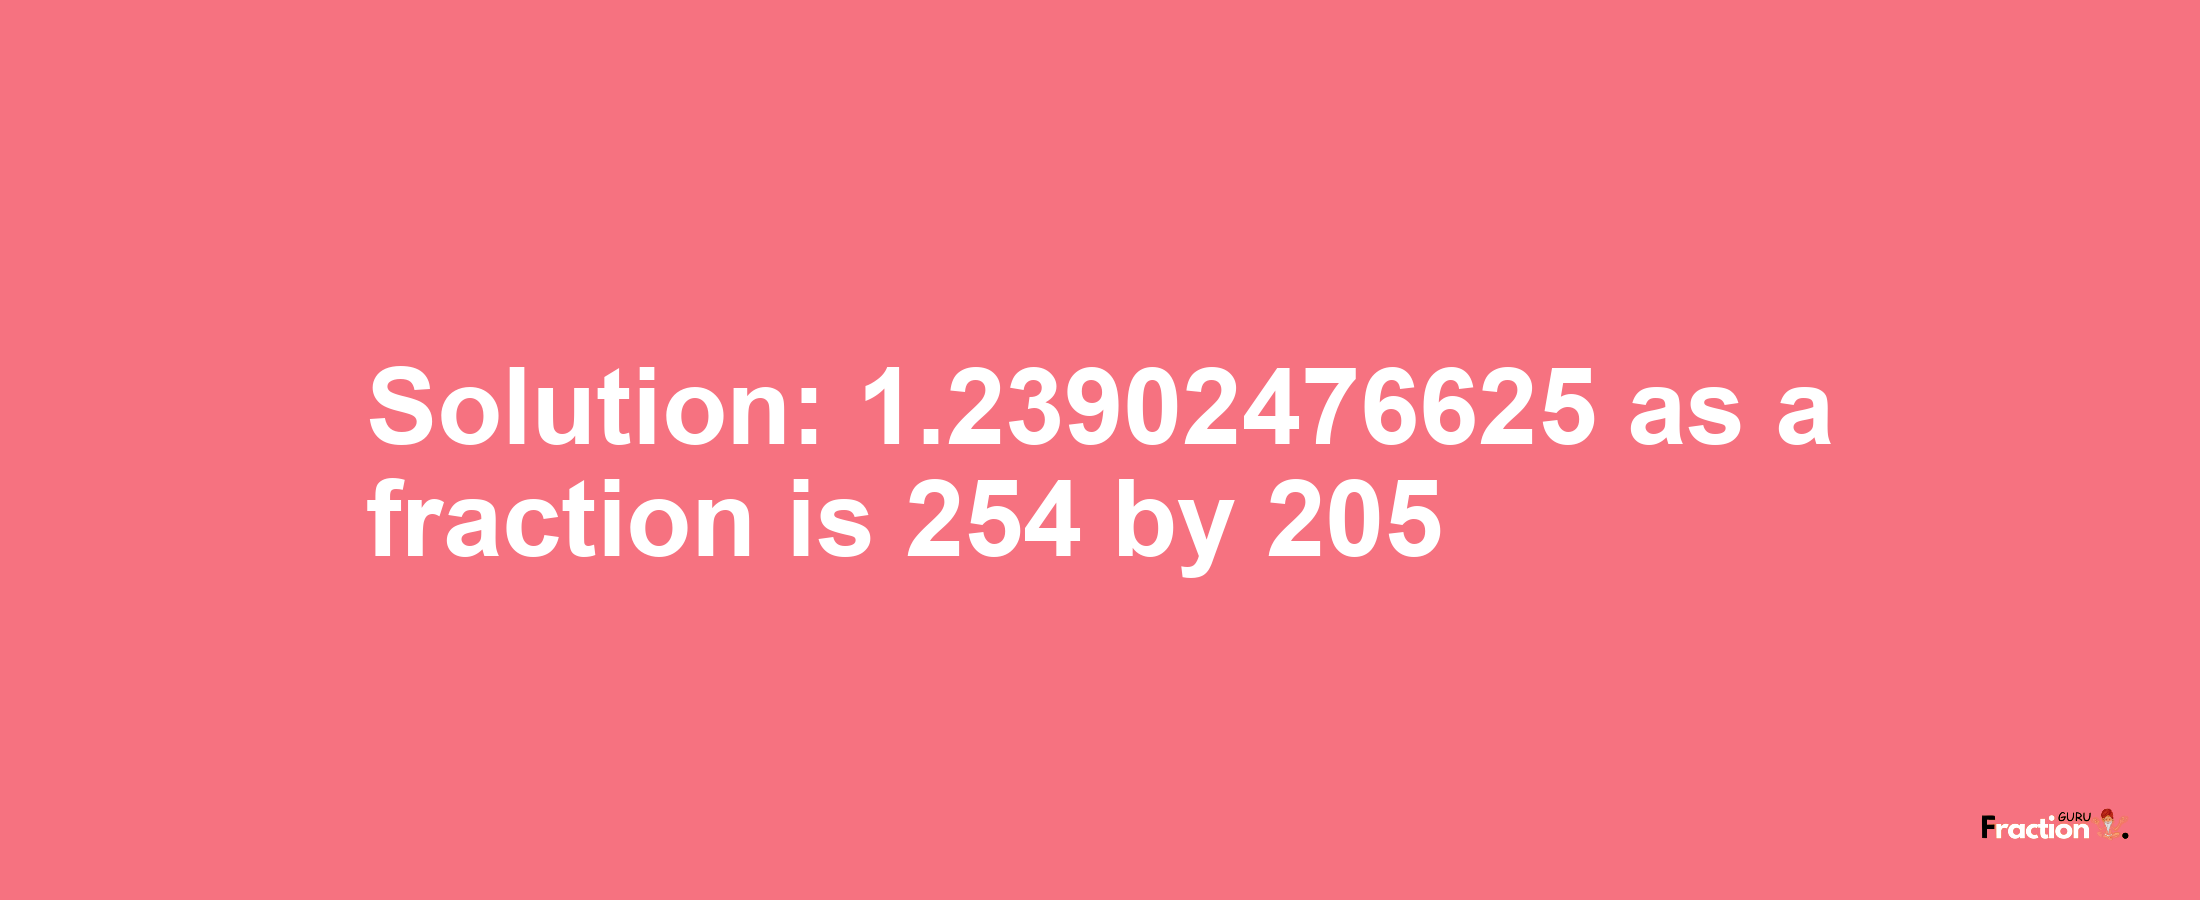 Solution:1.23902476625 as a fraction is 254/205